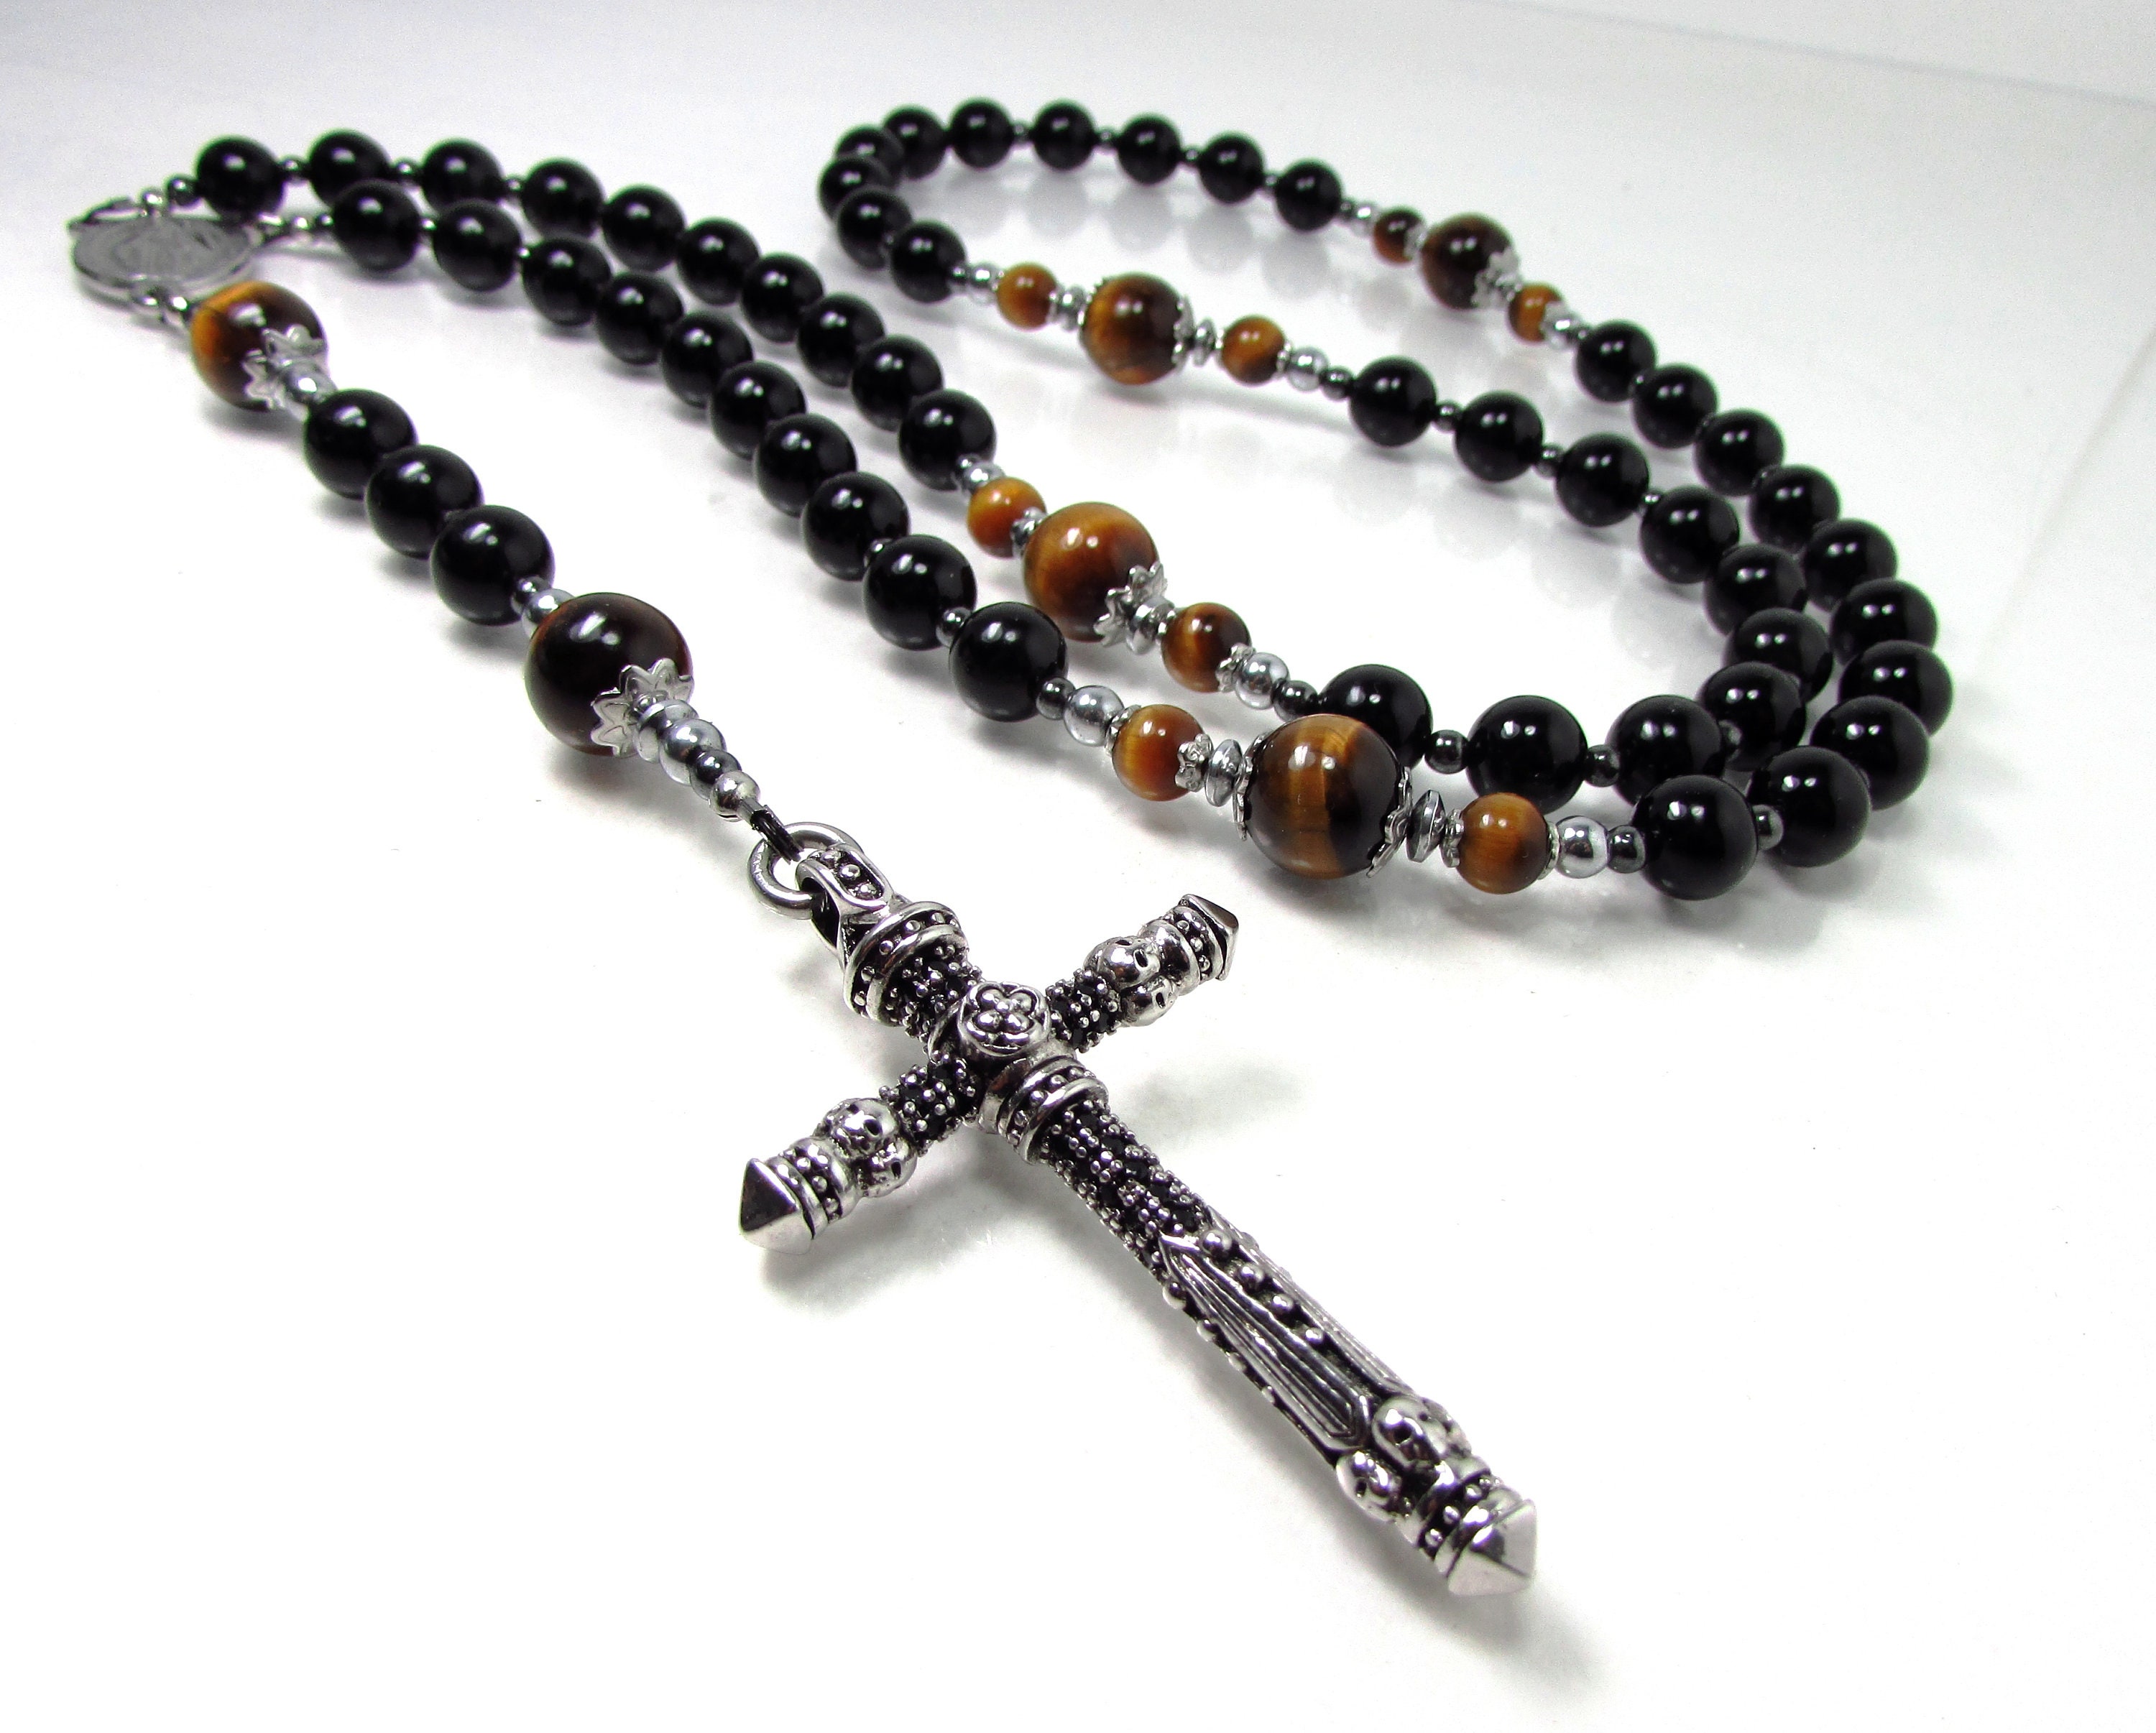 Onyx and Tiger Eye Rosary Necklace With Stainless Steel Cross - Etsy